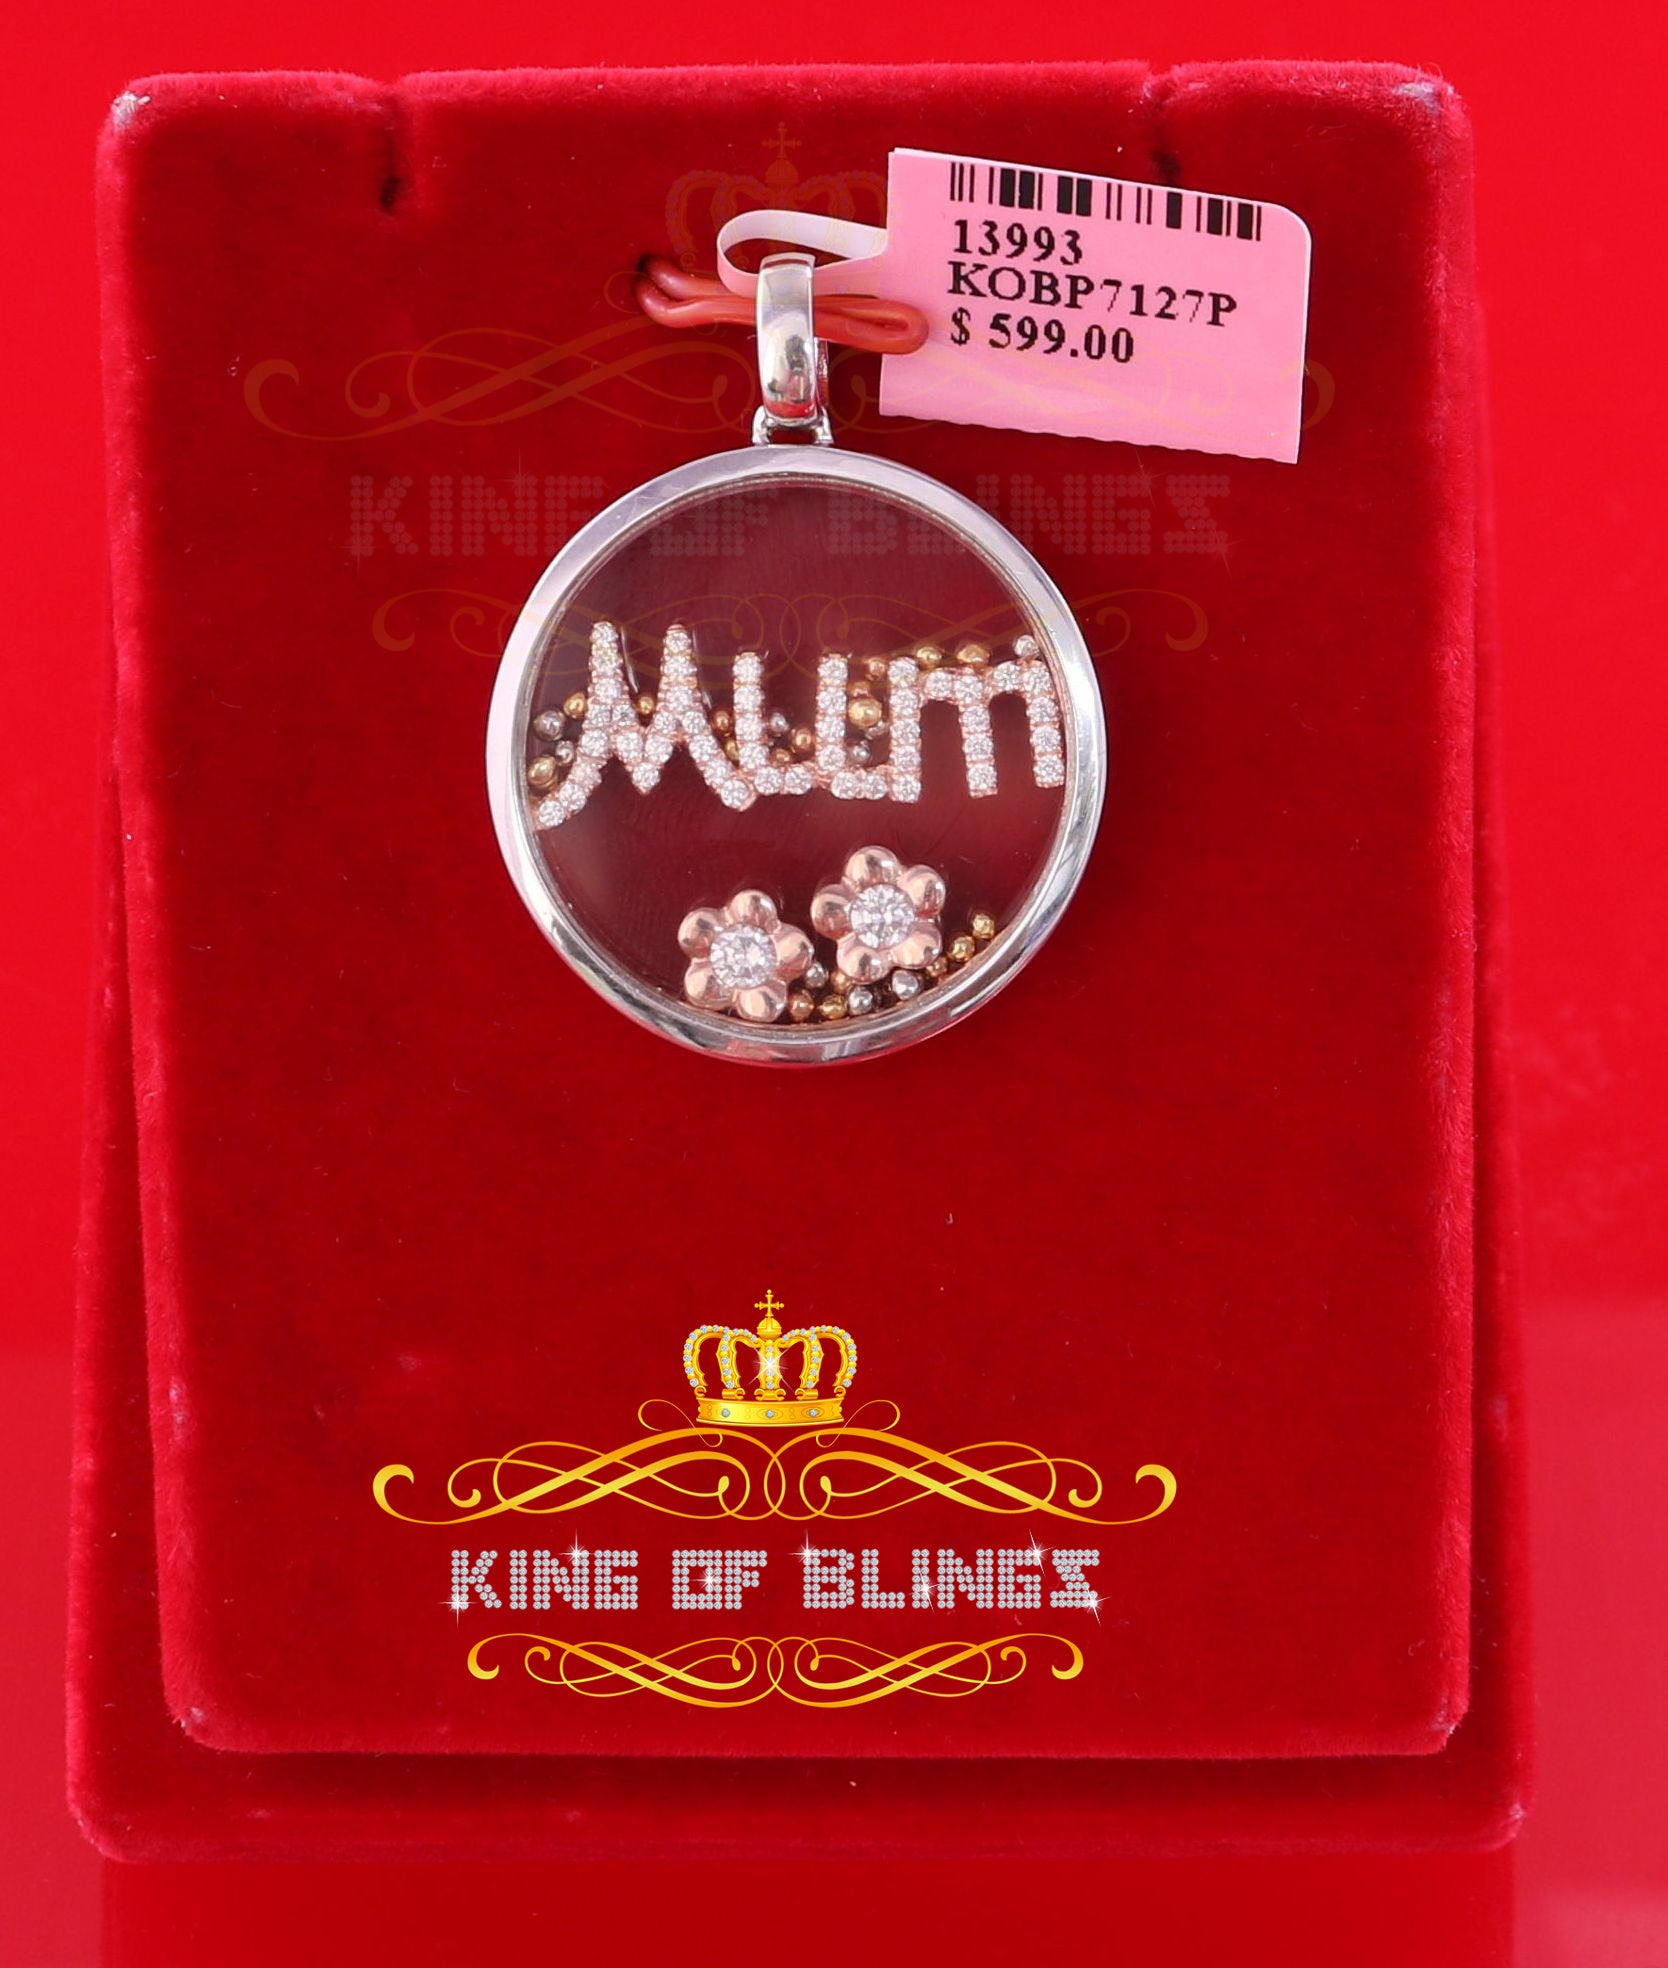 King Of Bling's White 925 Sterling Silver Charming Mum Letter Pendant Style with Cubic Zirconia KING OF BLINGS